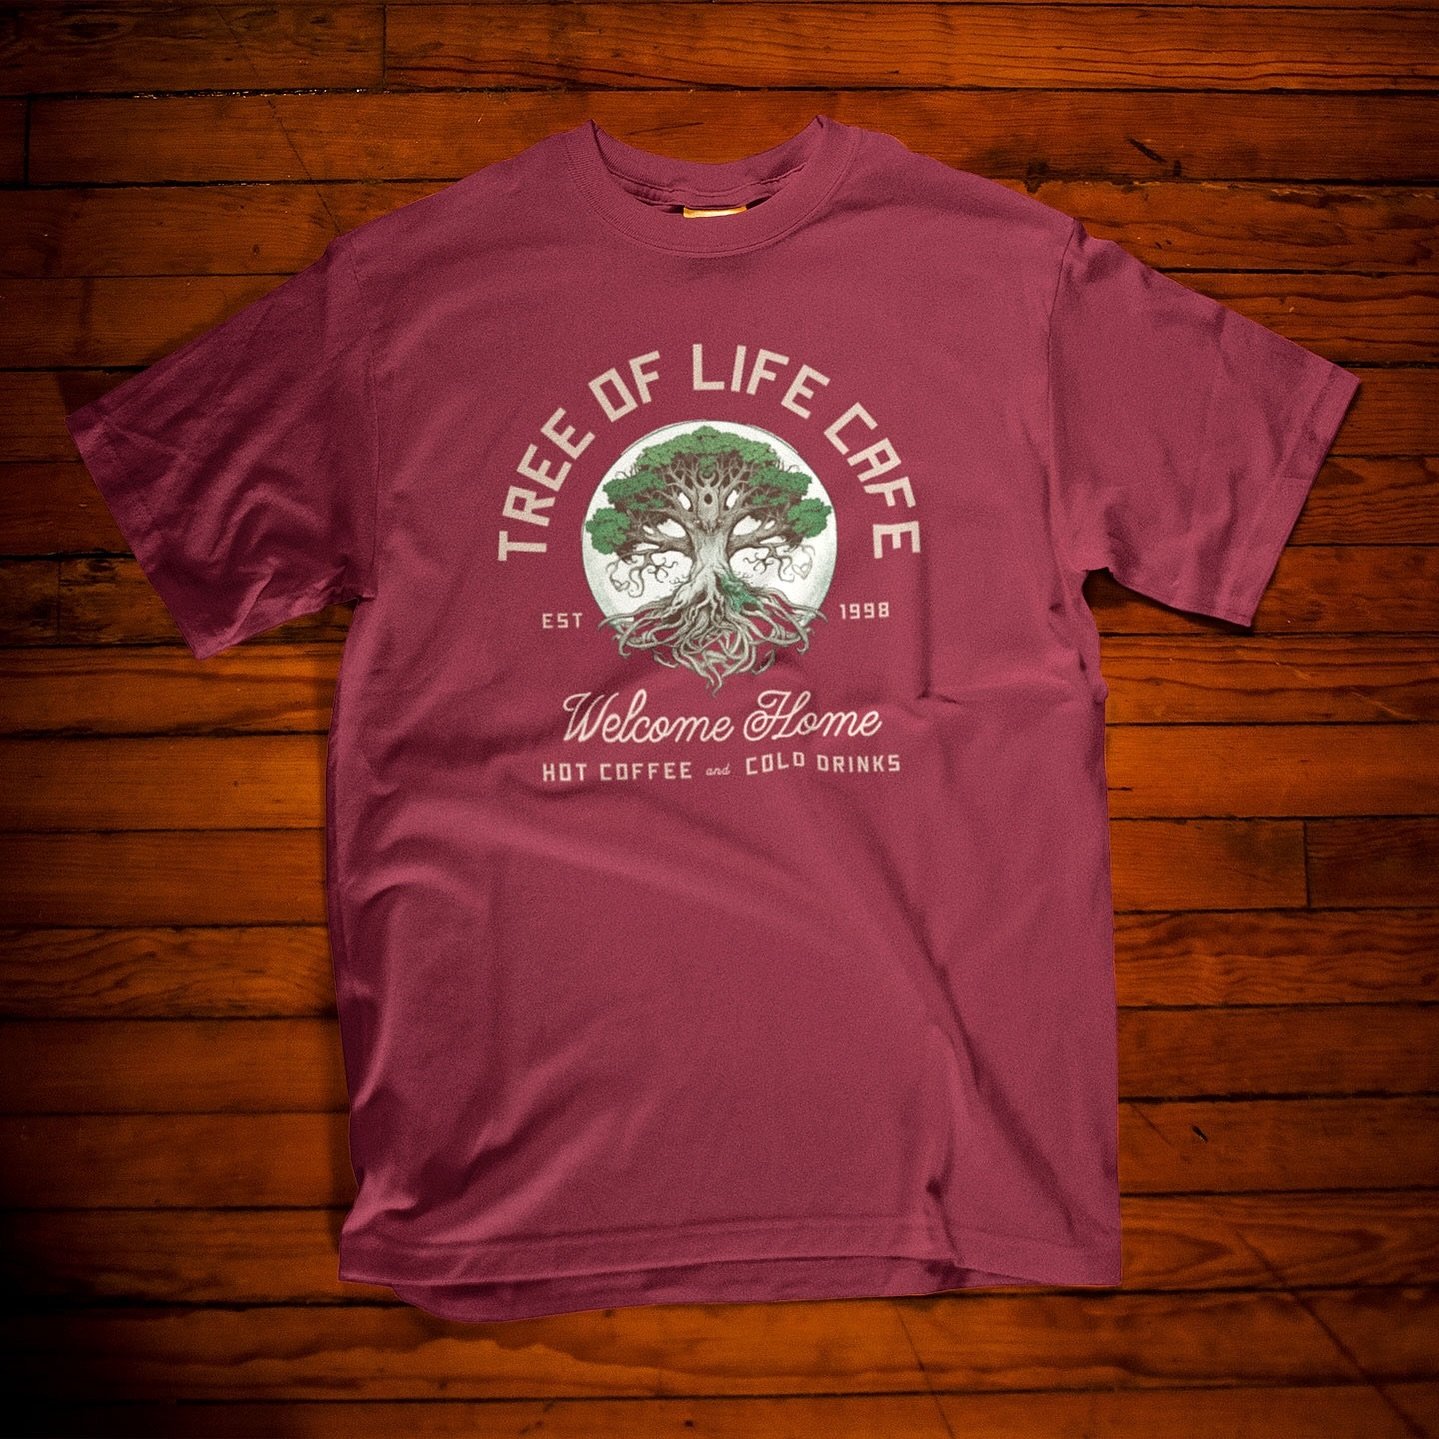 Step into the magical world of coffee wit our Tree of Life Cafe T-shirt! 

Inspired by the cozy vibe of enjoying a cup of coffee amidst the enchanting ambiance, this authentic original design captures the essence of Animal Kingdom magic for coffee lo